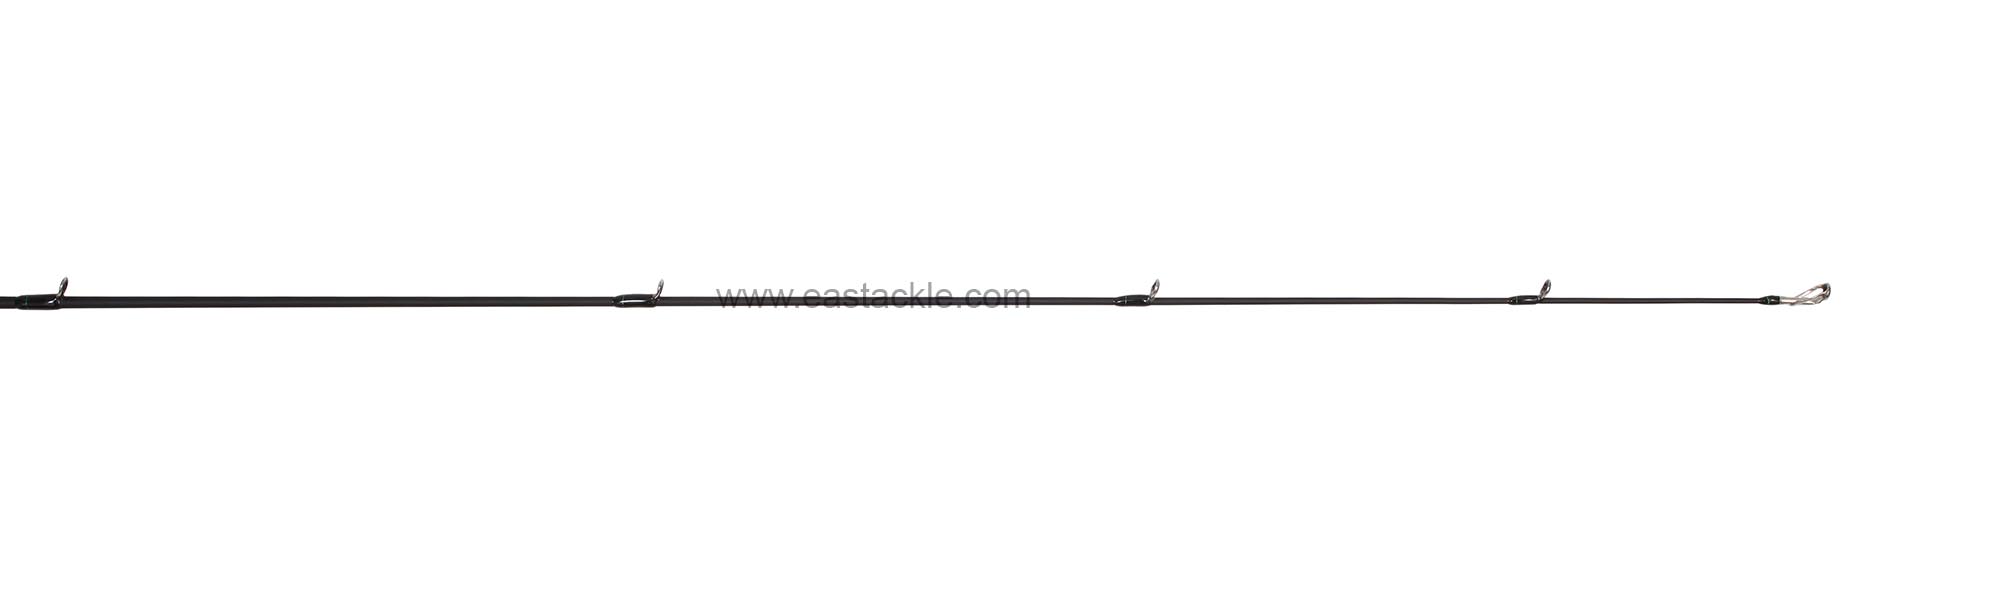 Rapala - Koivu - KVC651M - Bait Casting Rod - Tip Section (Side View) | Eastackle